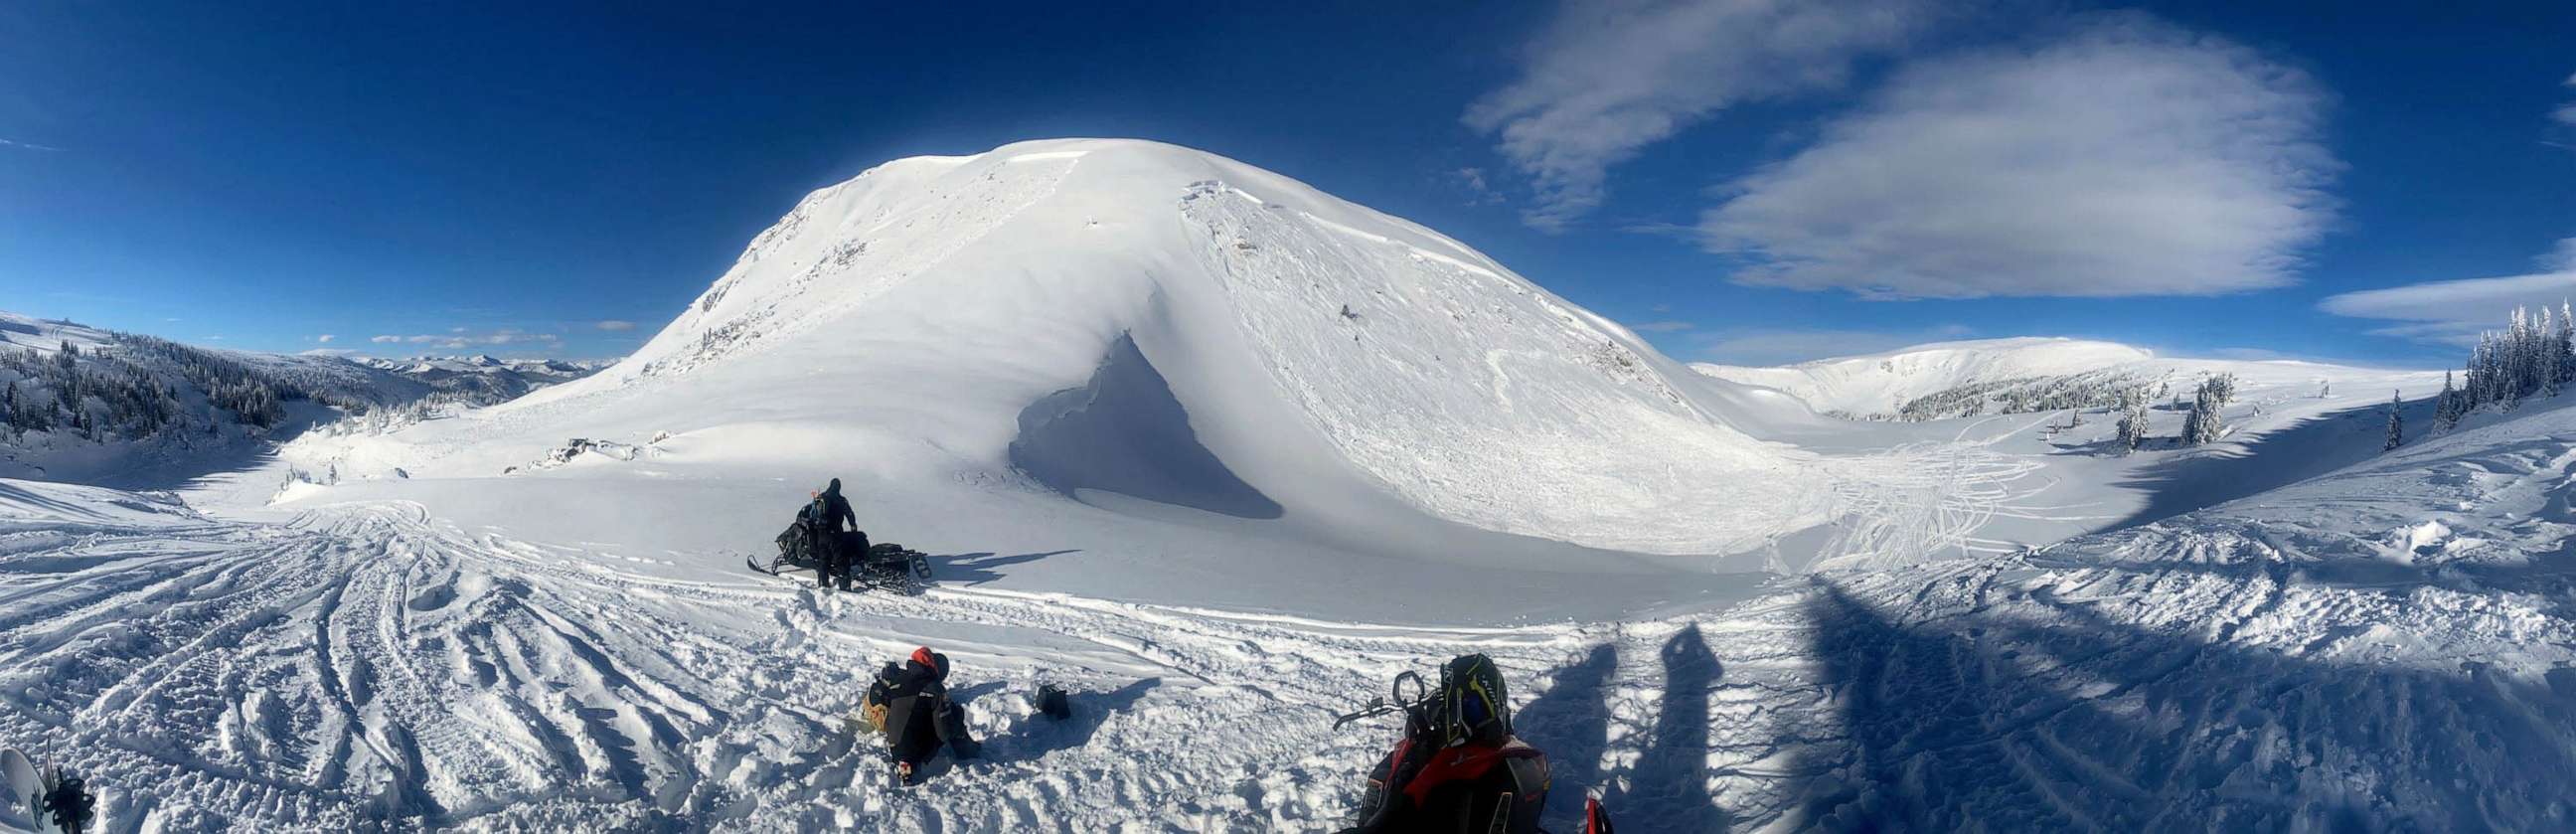 PHOTO: On January 7, 2023, at around 2:00 PM, two snowmobilers were caught, buried, and killed in a large avalanche on the east face of Mount Epworth, about 6 miles east of Winter Park.